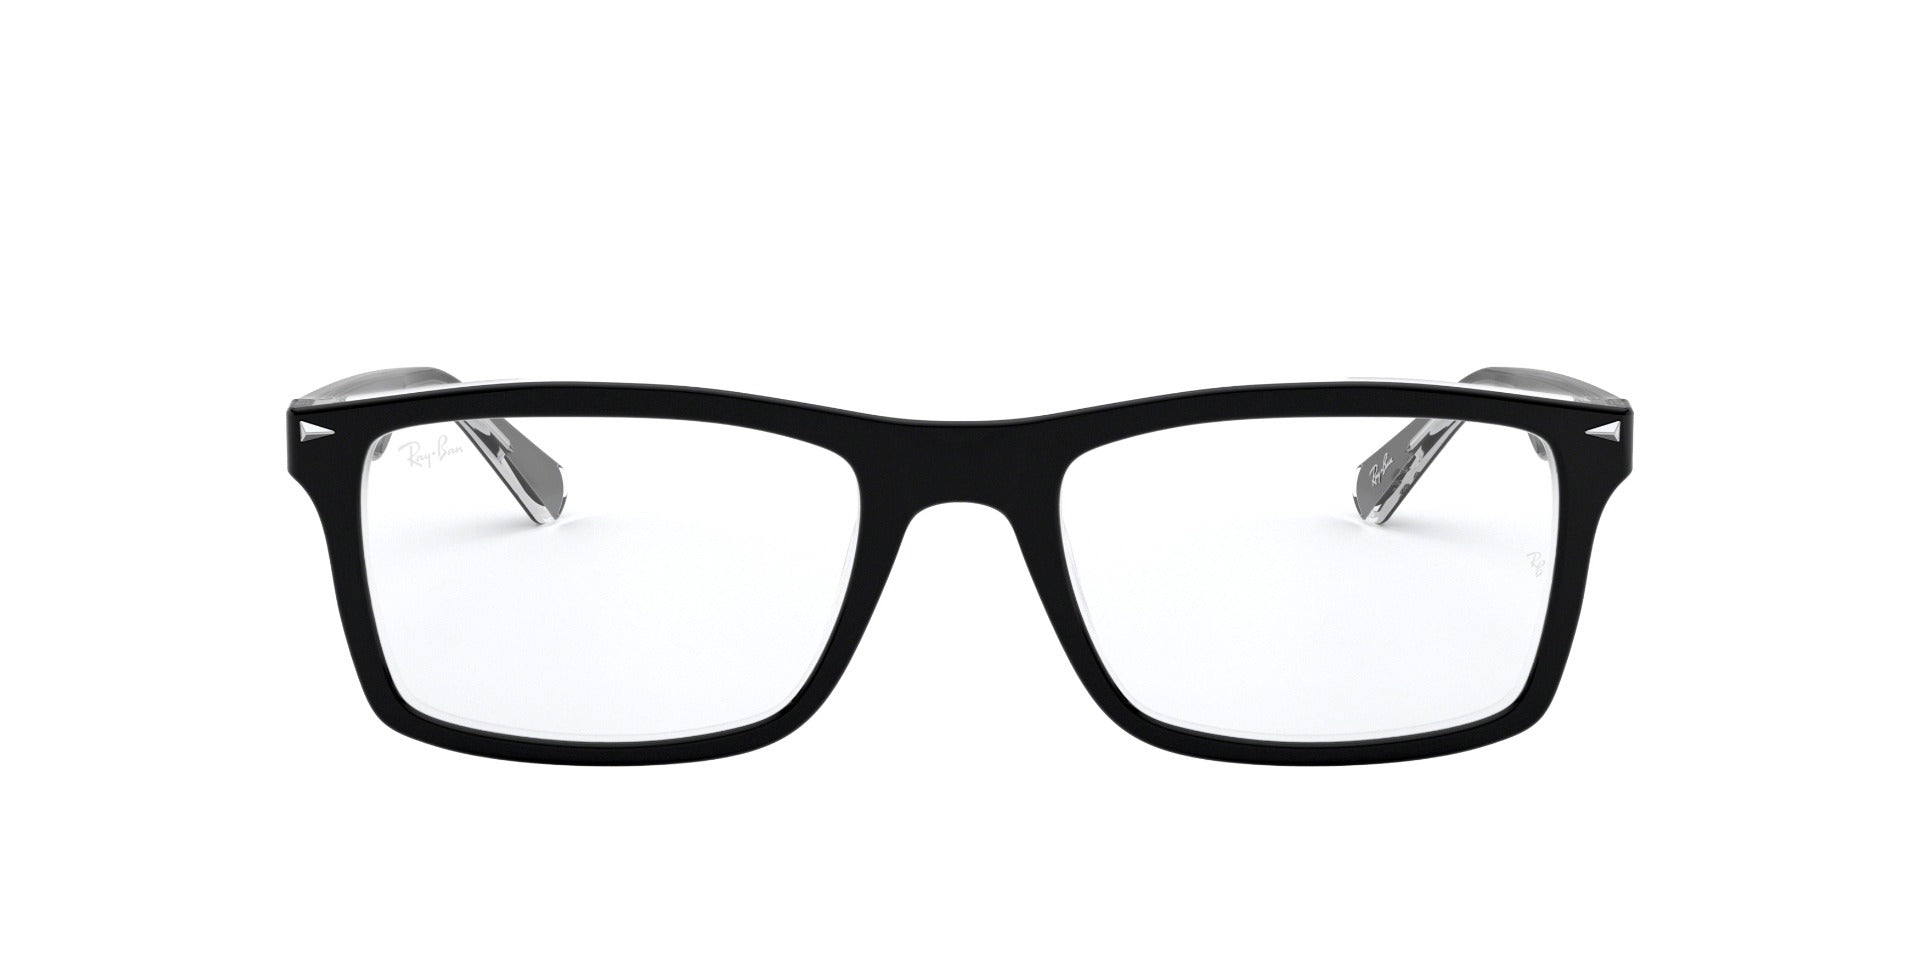 Ray-Ban RB5287 Square Glasses